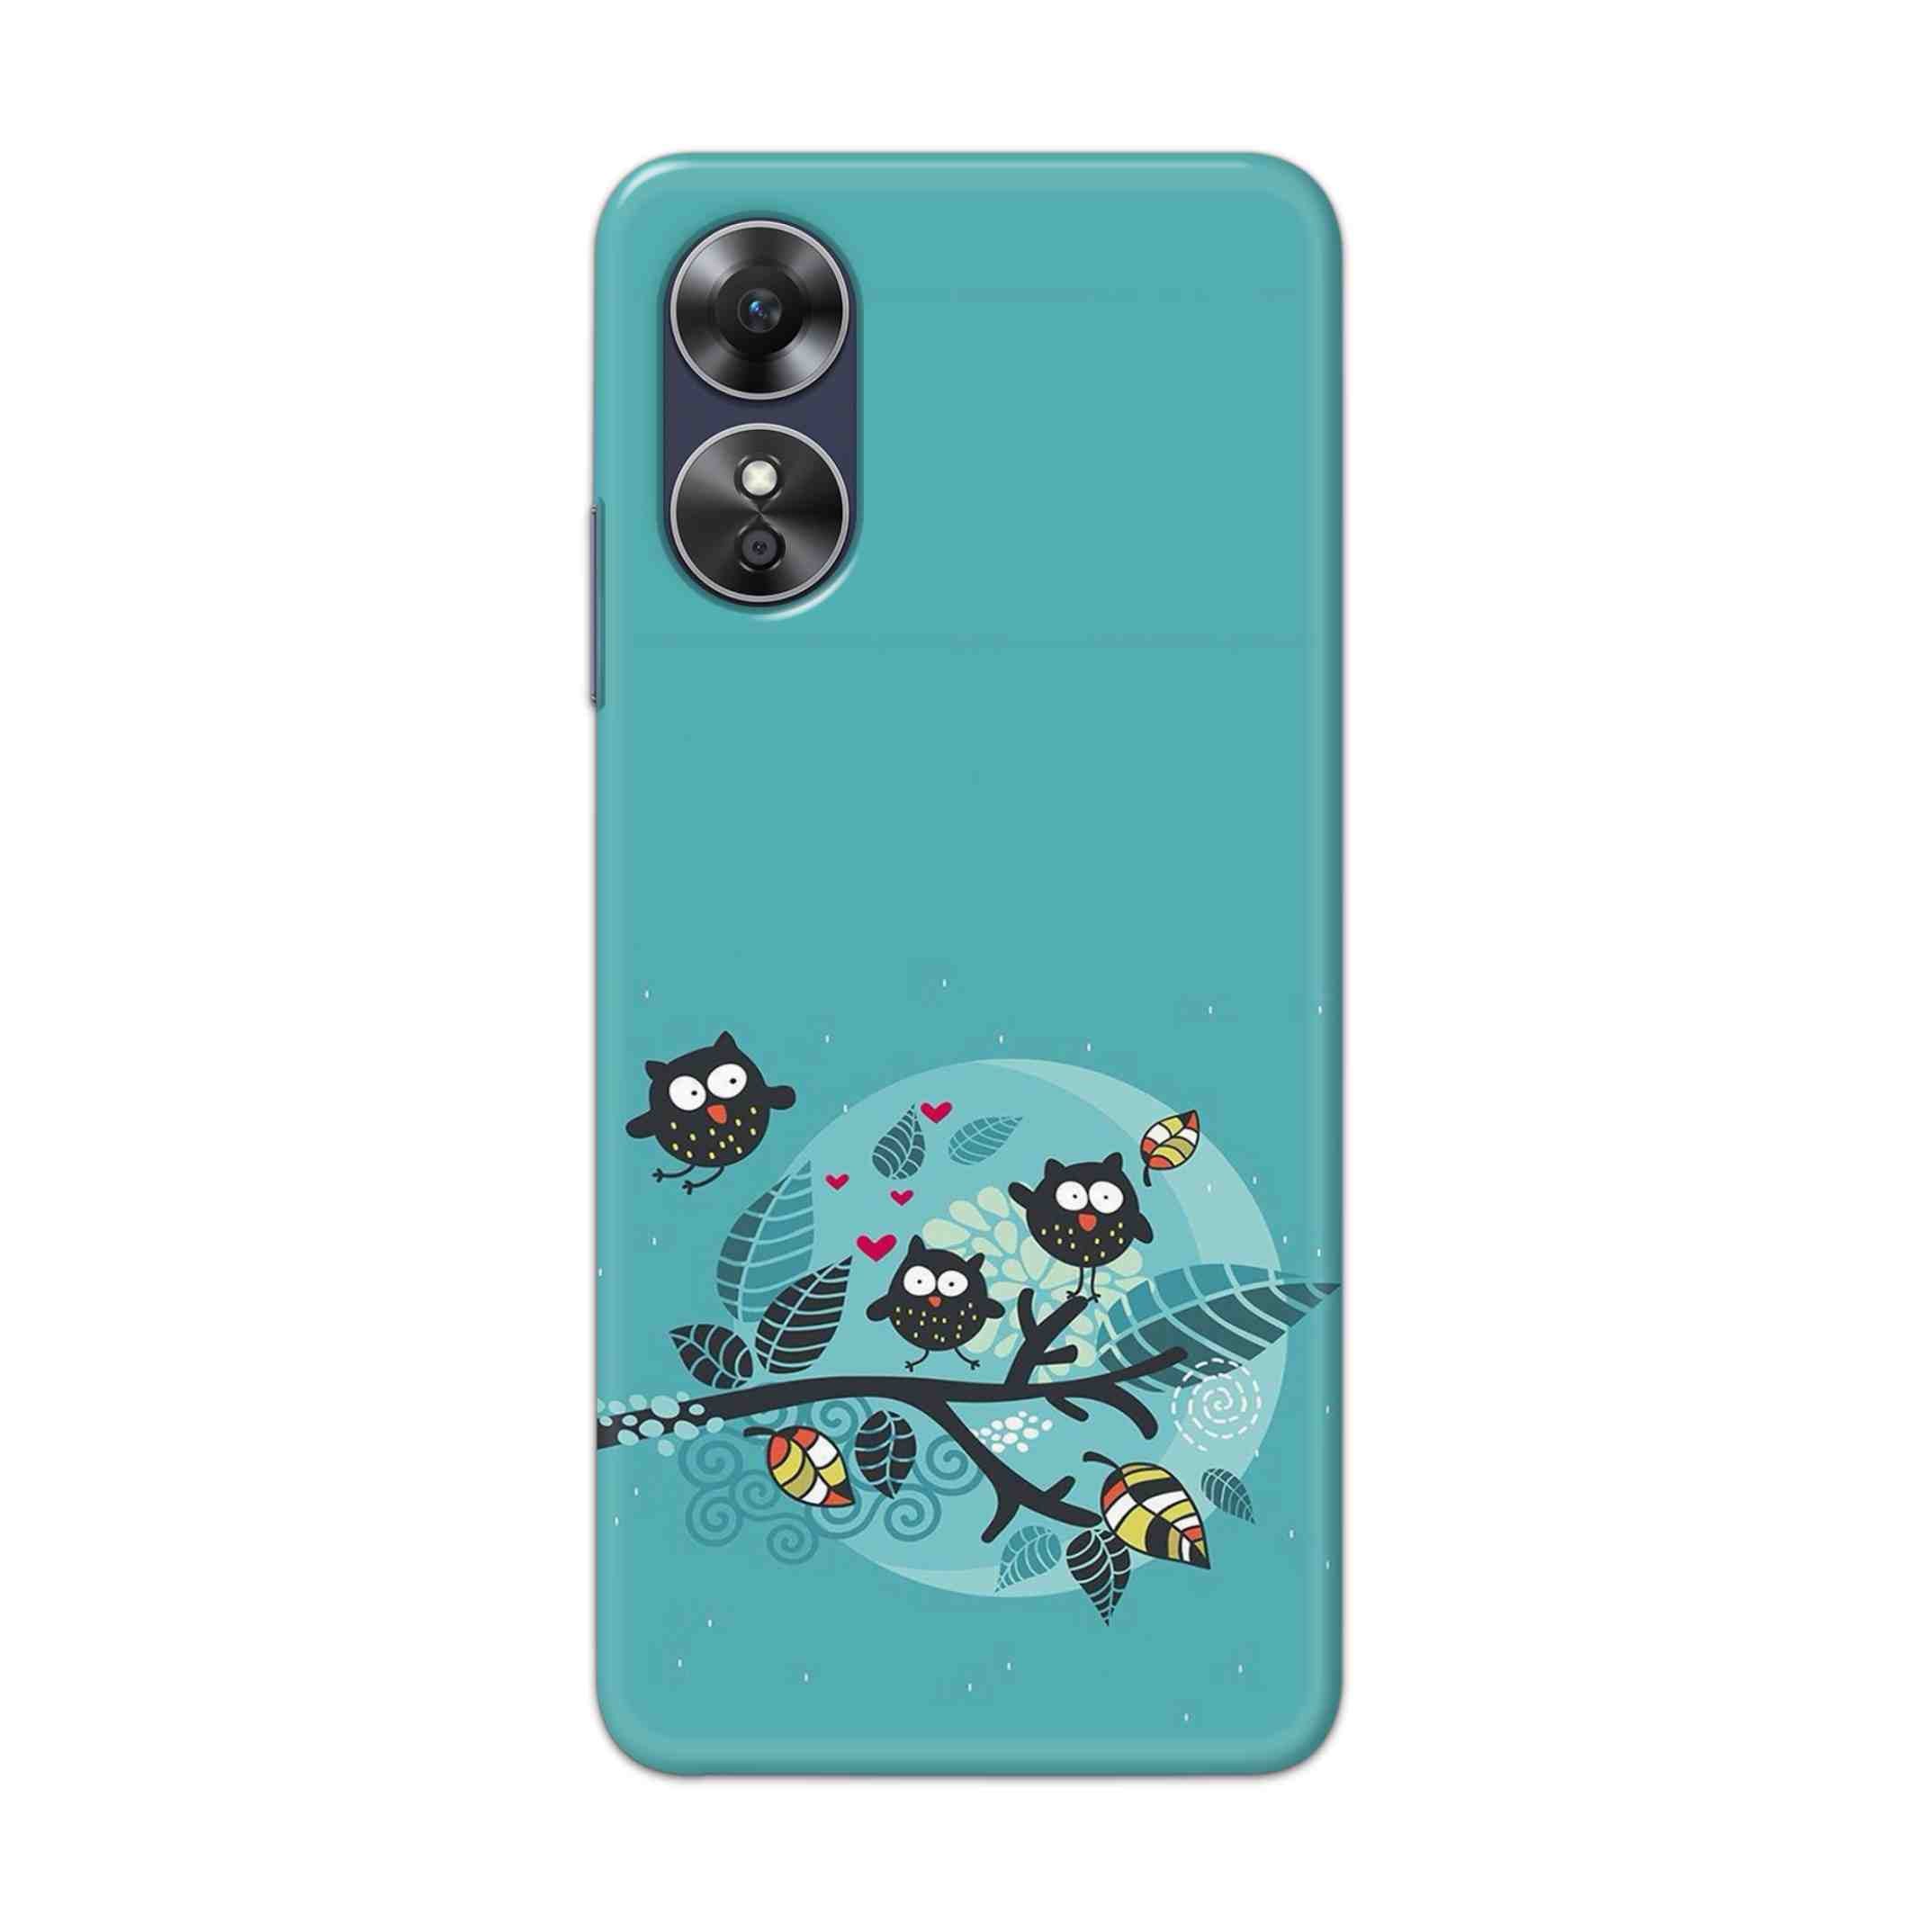 Buy Owl Hard Back Mobile Phone Case Cover For Oppo A17 Online